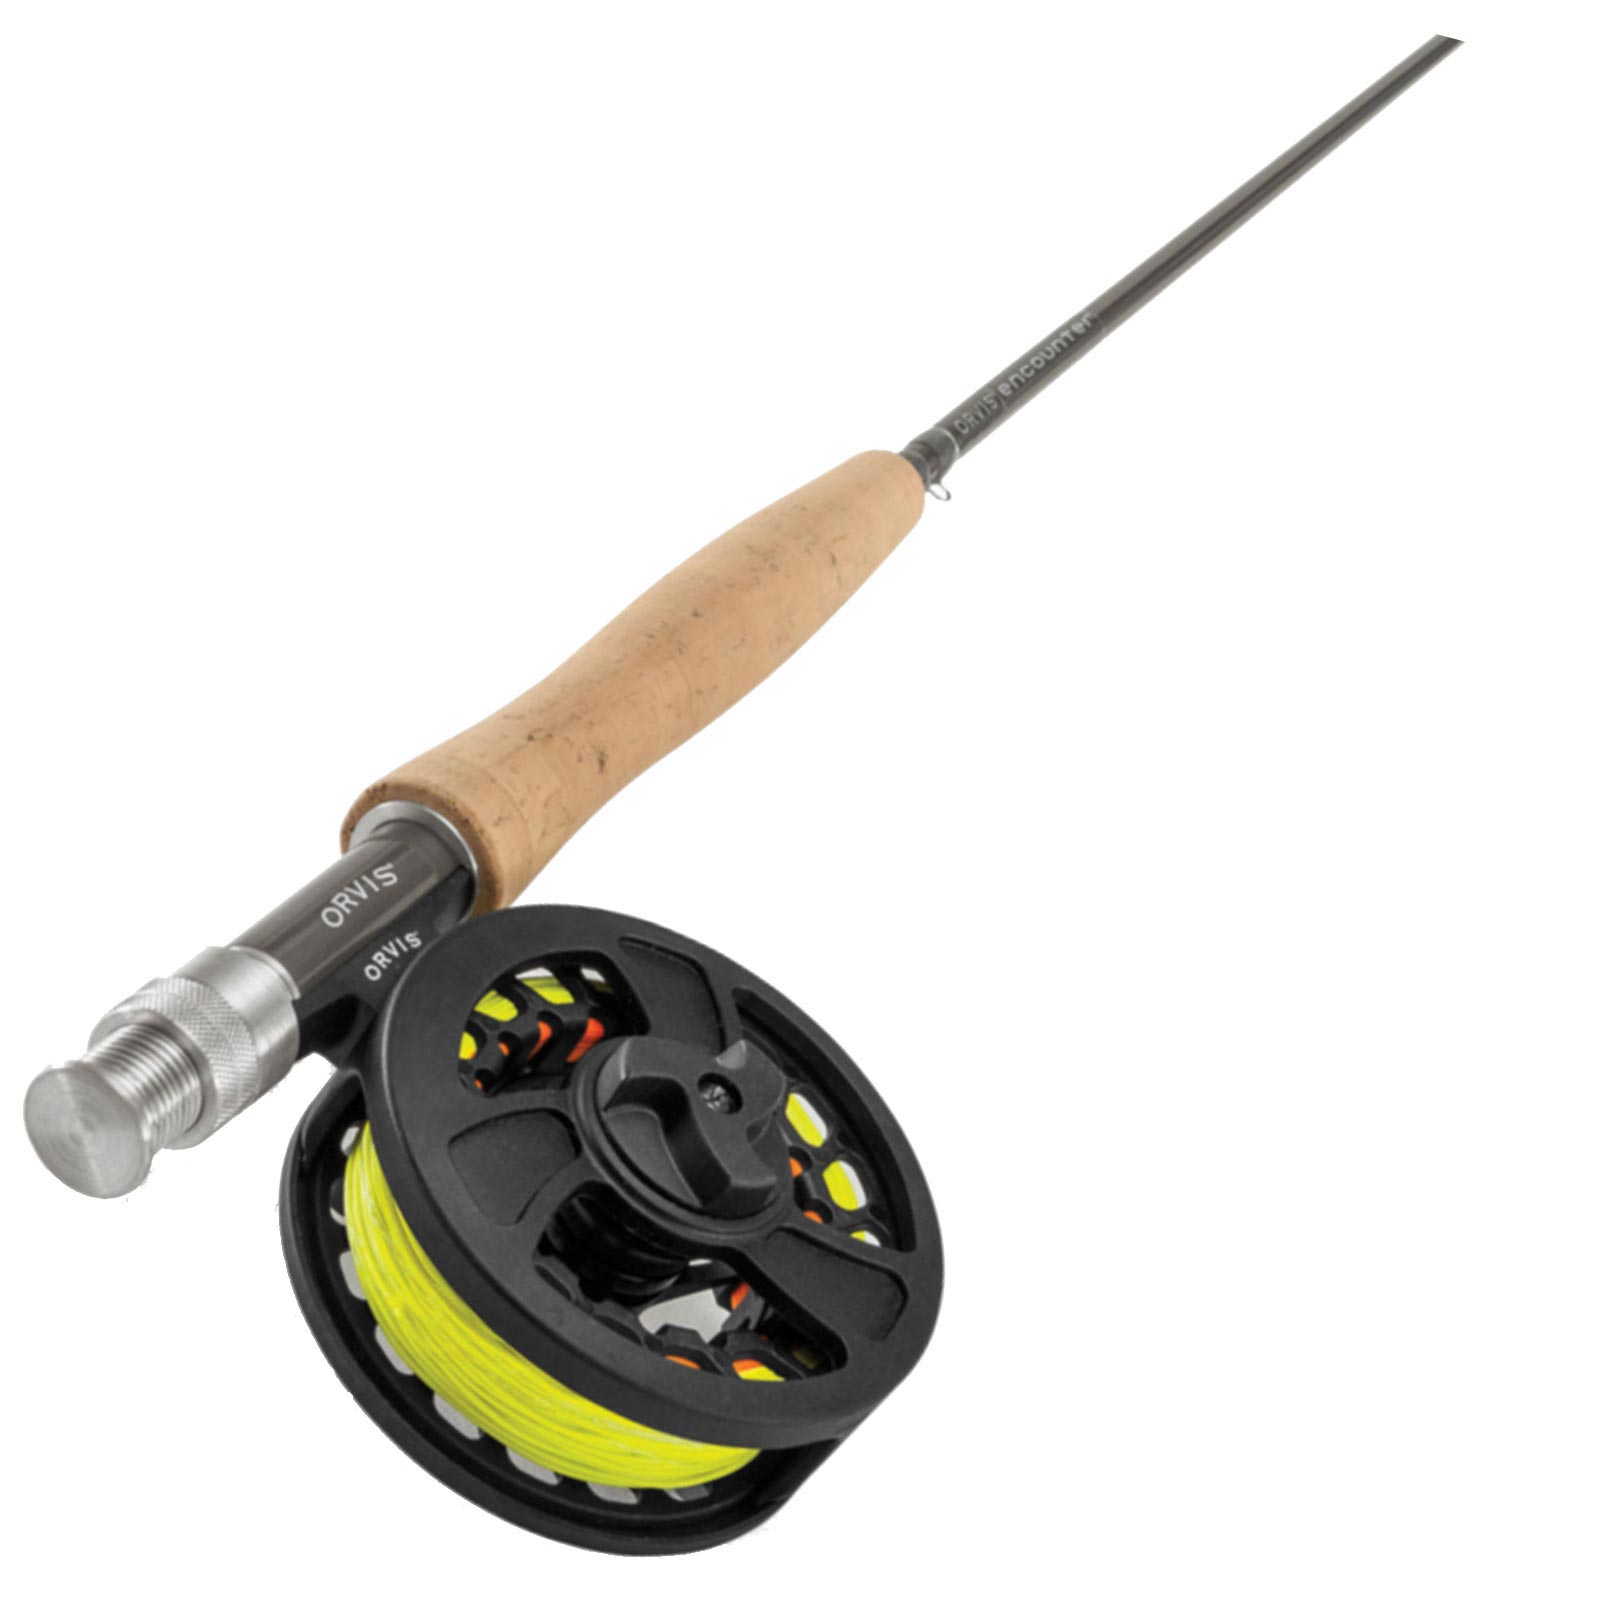 Orvis Encounter Fly Outfit 3ASJ5363 • Find prices »